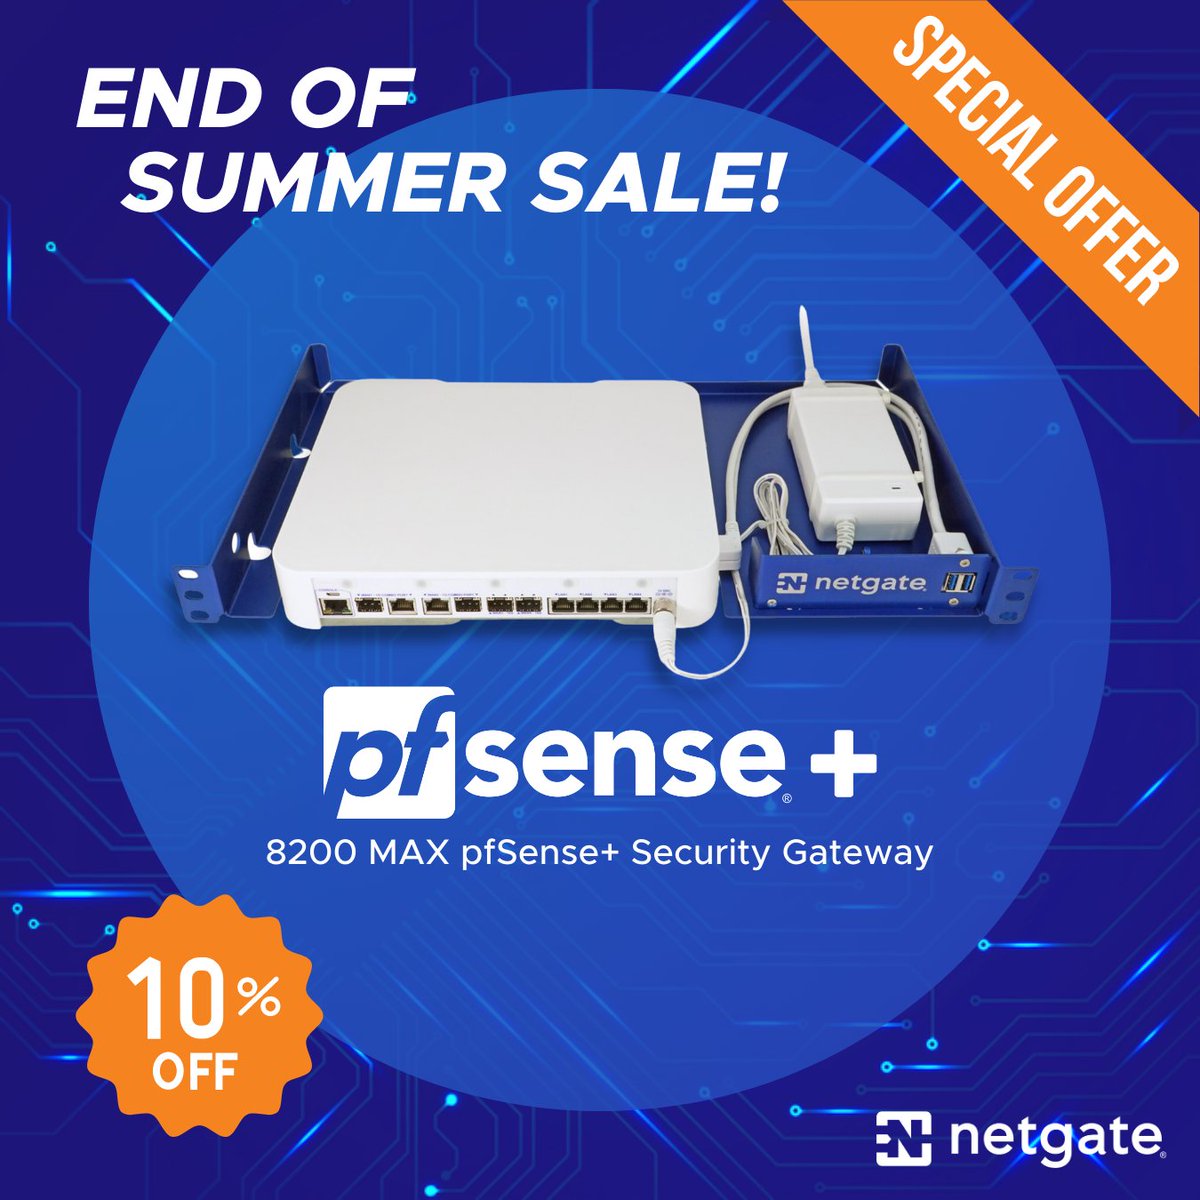 🎉 Exciting News! Get 10% OFF on the Netgate 8200 MAX pfSense+ Security Gateway - a high-performance firewall for your network. Use the code SUMMER8200. Offer ends Sep 30th. hubs.ly/Q020zPpR0 #NetworkSecurity #Sale